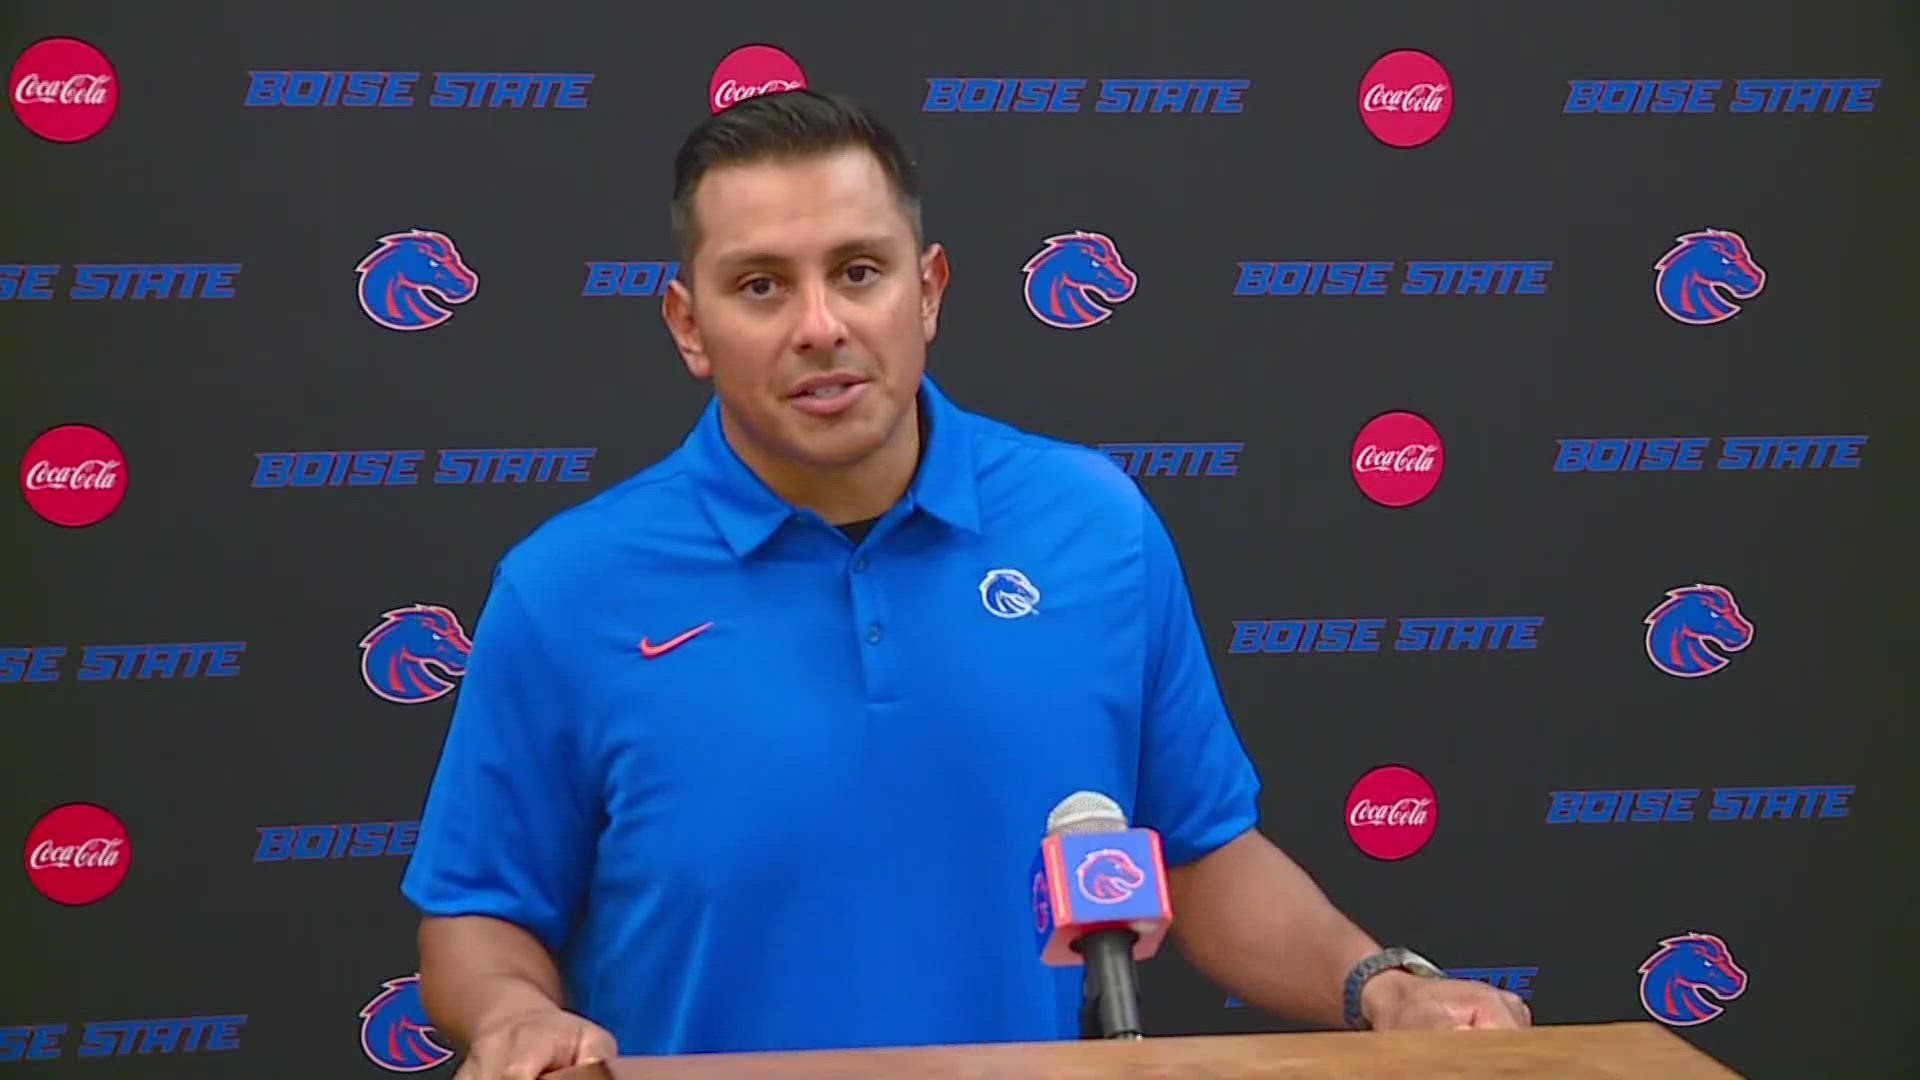 The Boise State Broncos open the 2022 football season Sept. 3 at Oregon State. August 1 press conference featured head coach and offensive and defensive coordinators